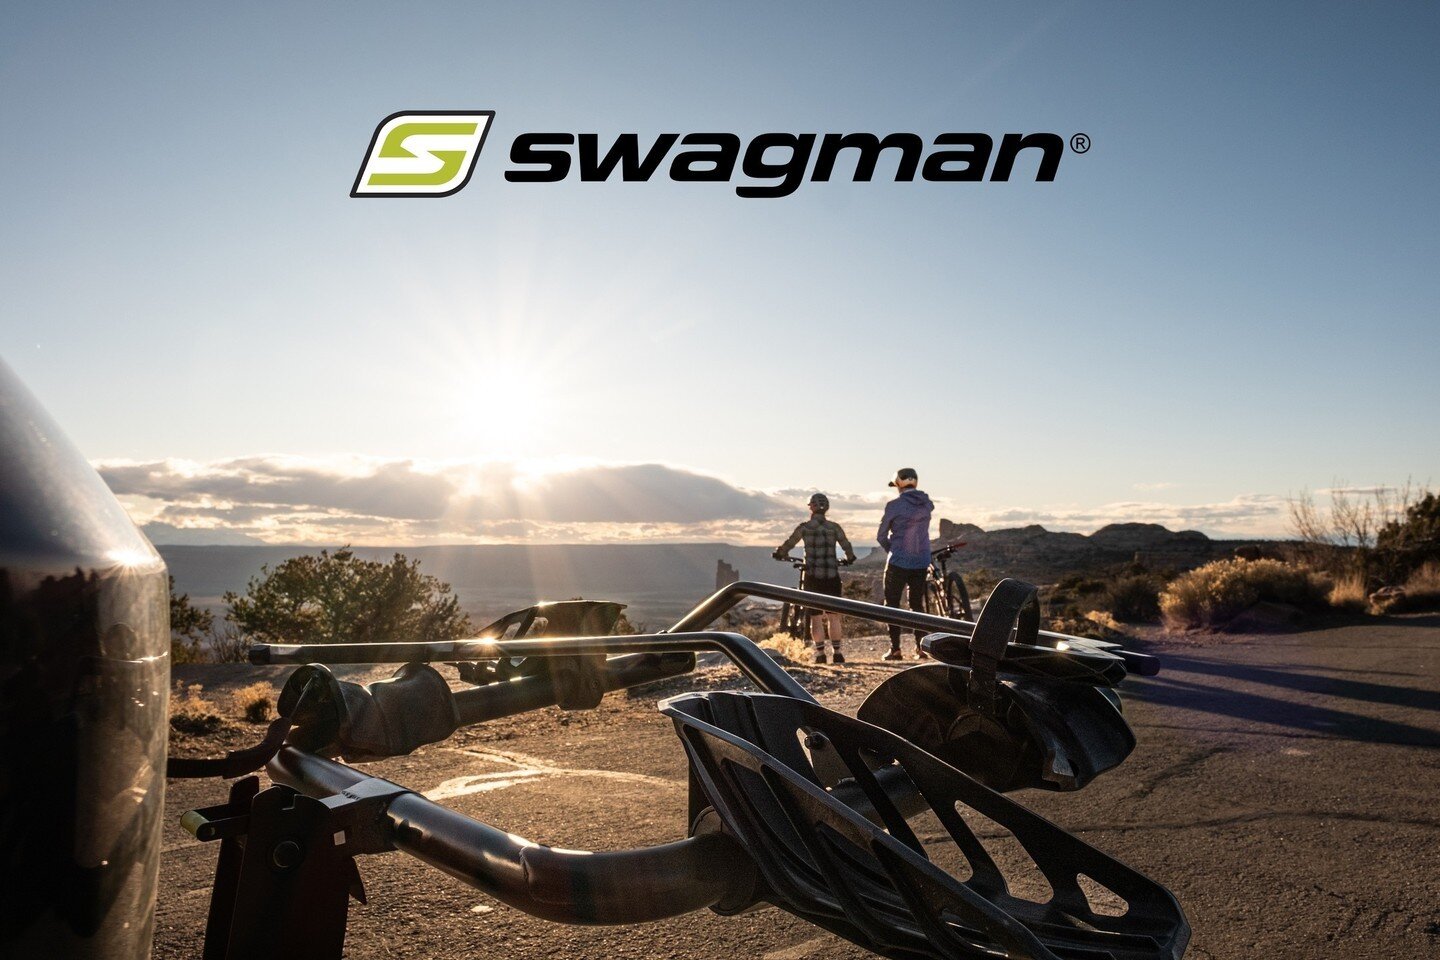 Each night during Moab Rocks, we hold a raffle with all proceeds going directly back to the Moab Trail Mix to help them maintain and preserve these incredible trails.⁠
⁠
This year we're thrilled to announce that Swagman has generously donated an Okan